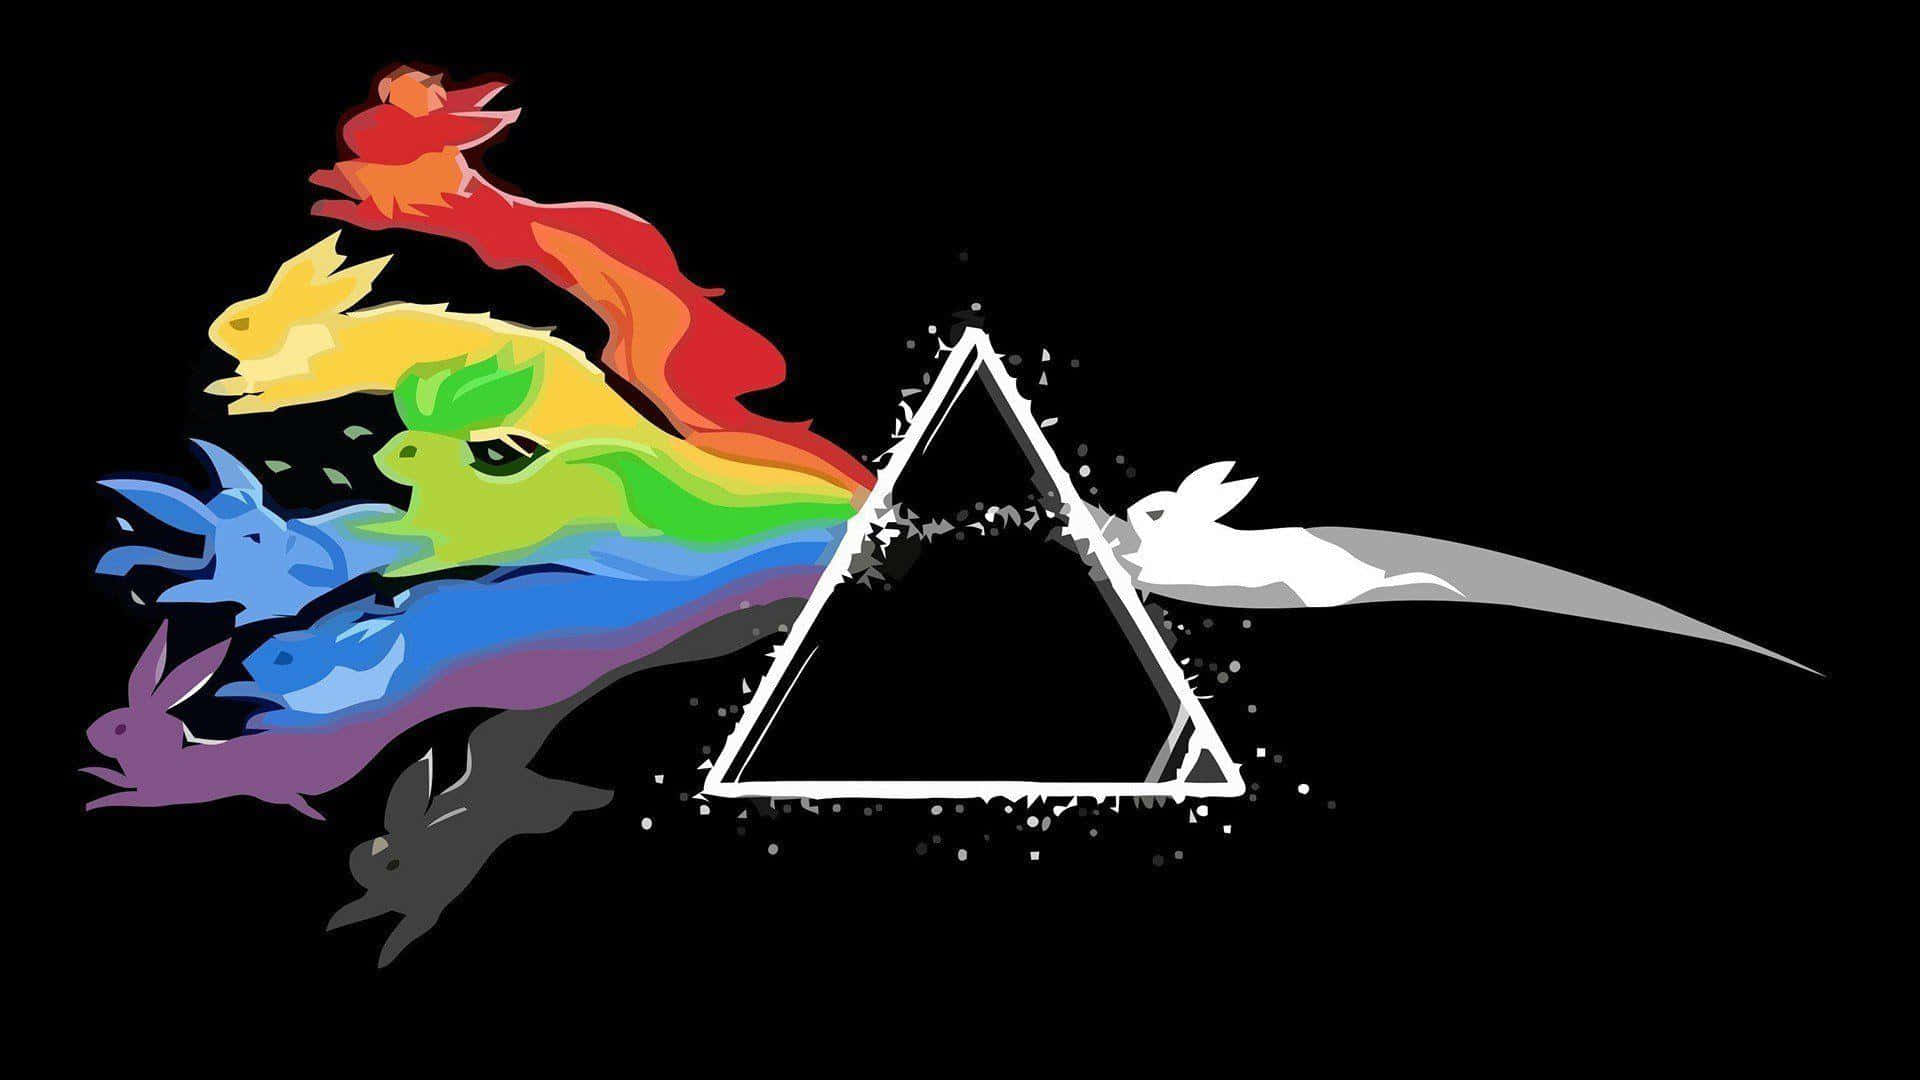 The iconic album artwork of Pink Floyd's Dark Side Of The Moon Wallpaper